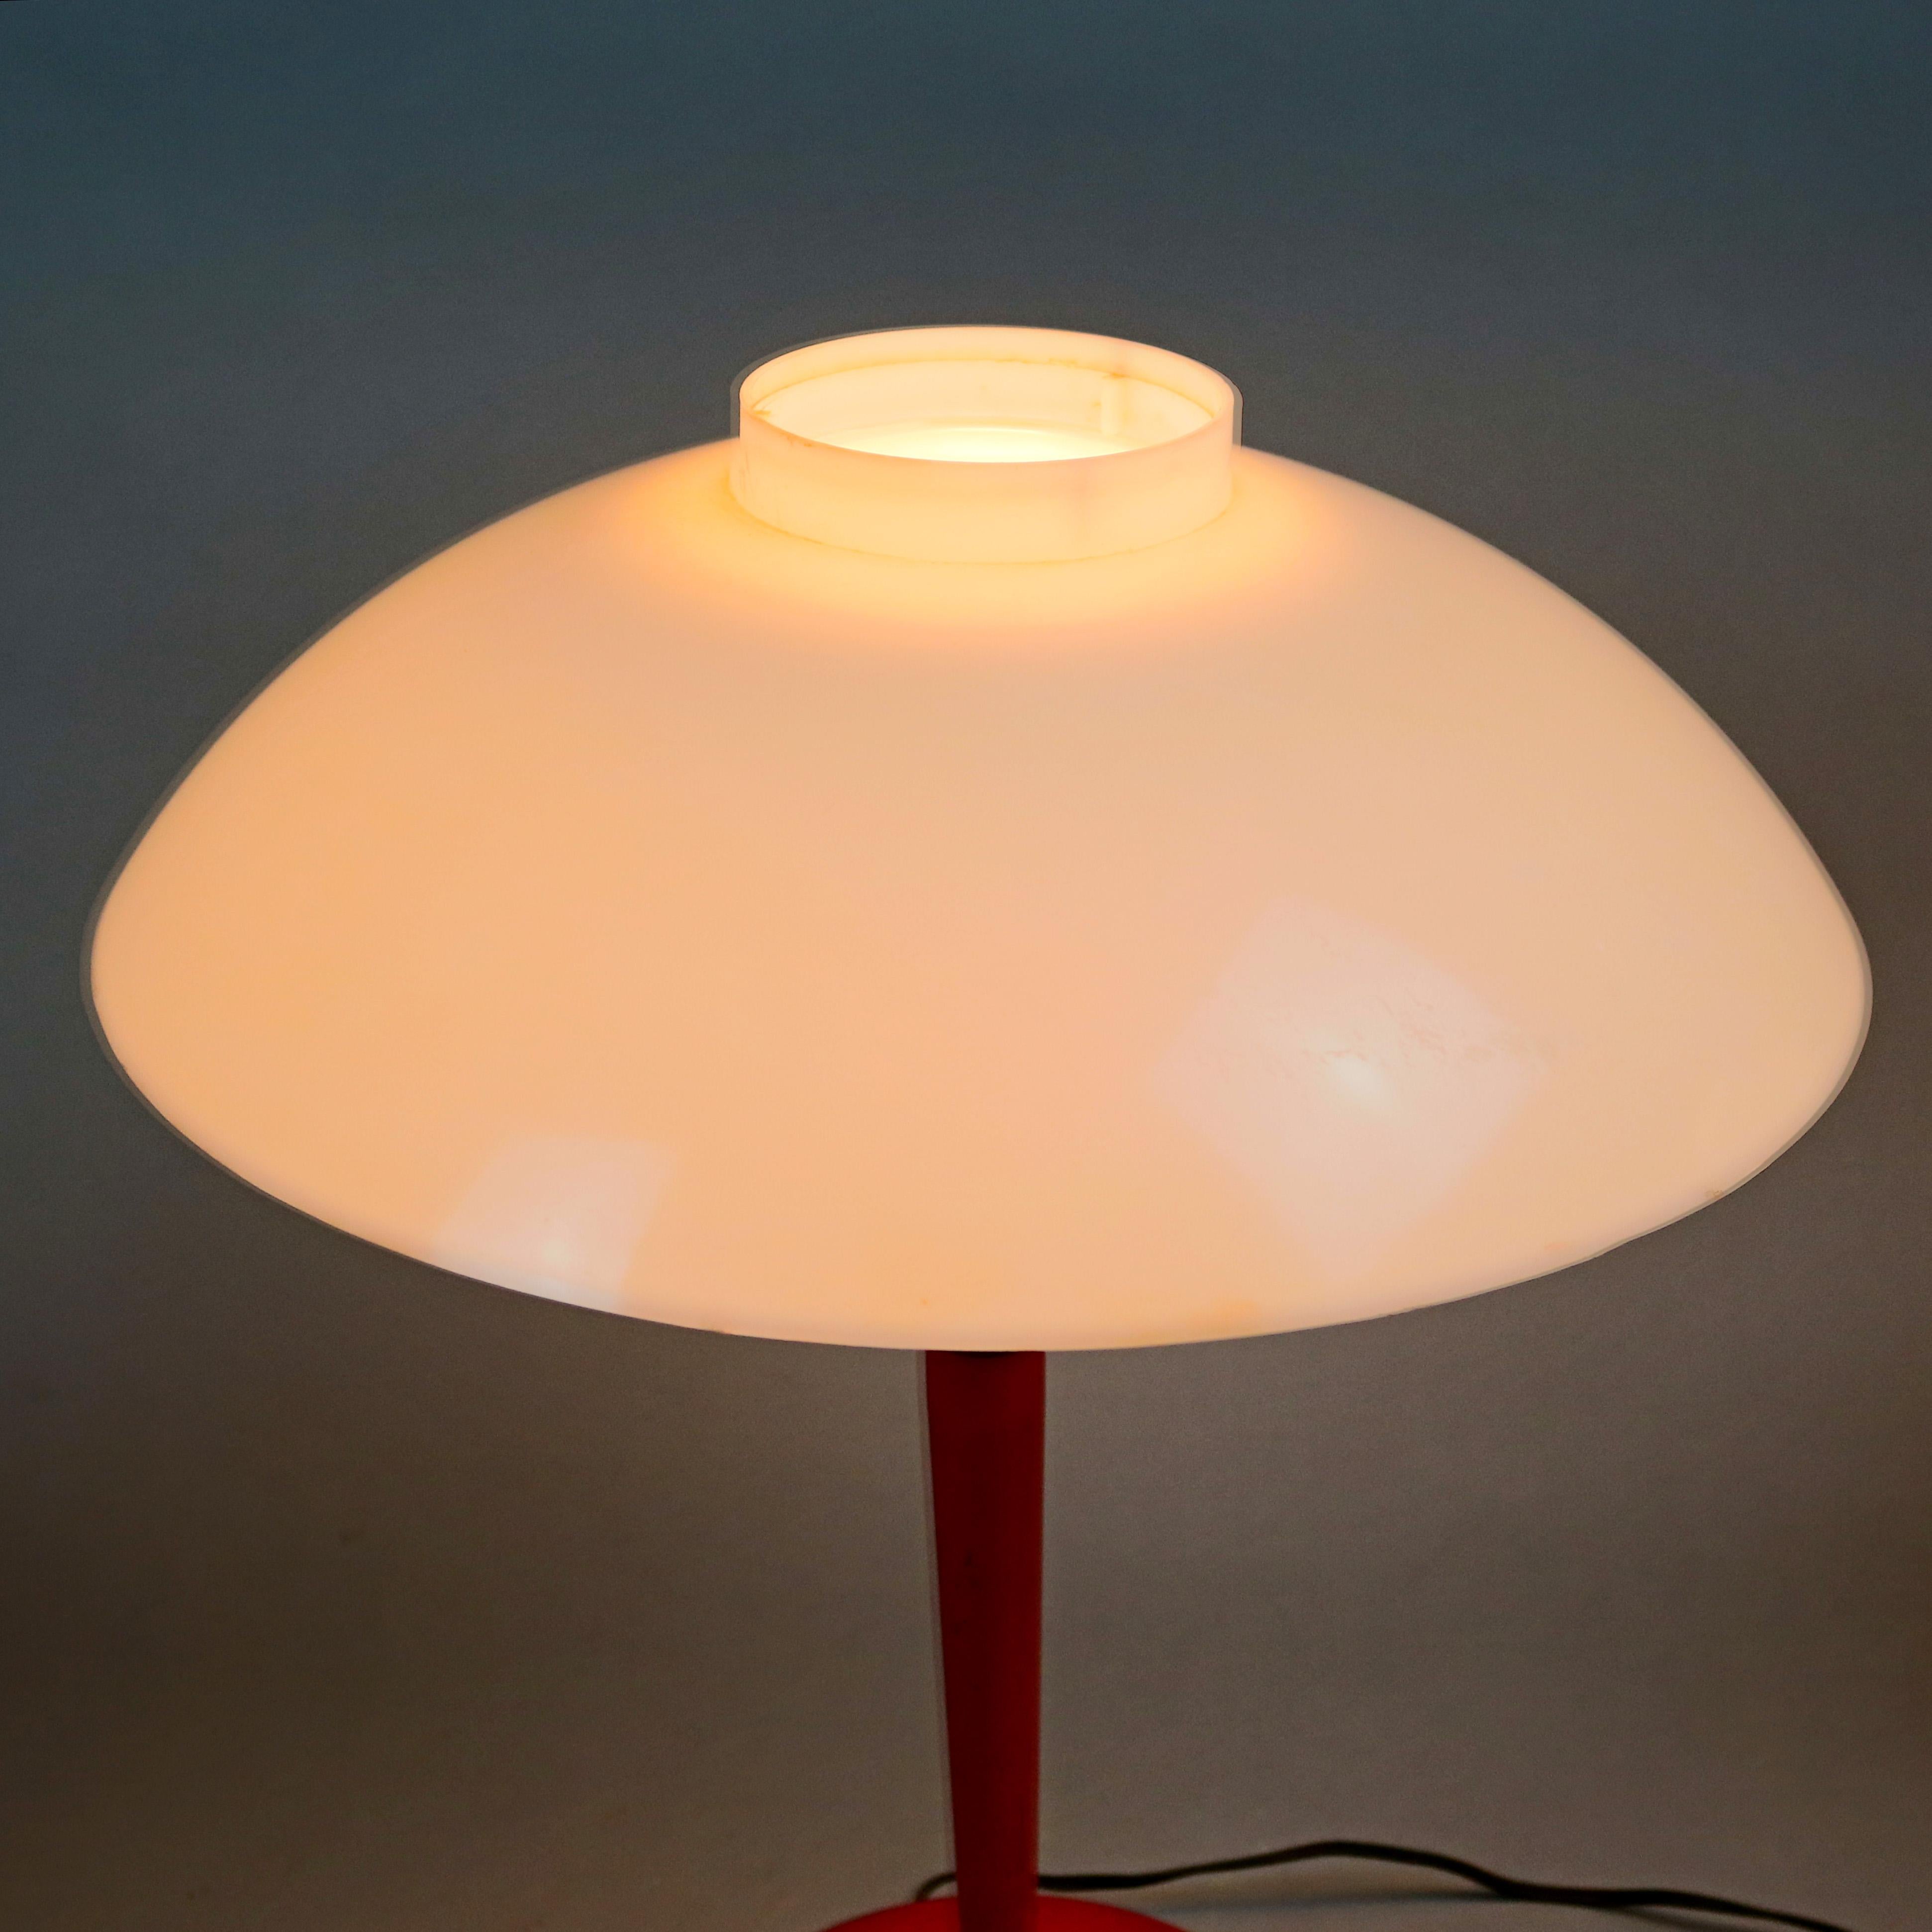 Painted Pair of Mid-Century Modern Italian Metal and Acrylic Umbrella Table Lamps